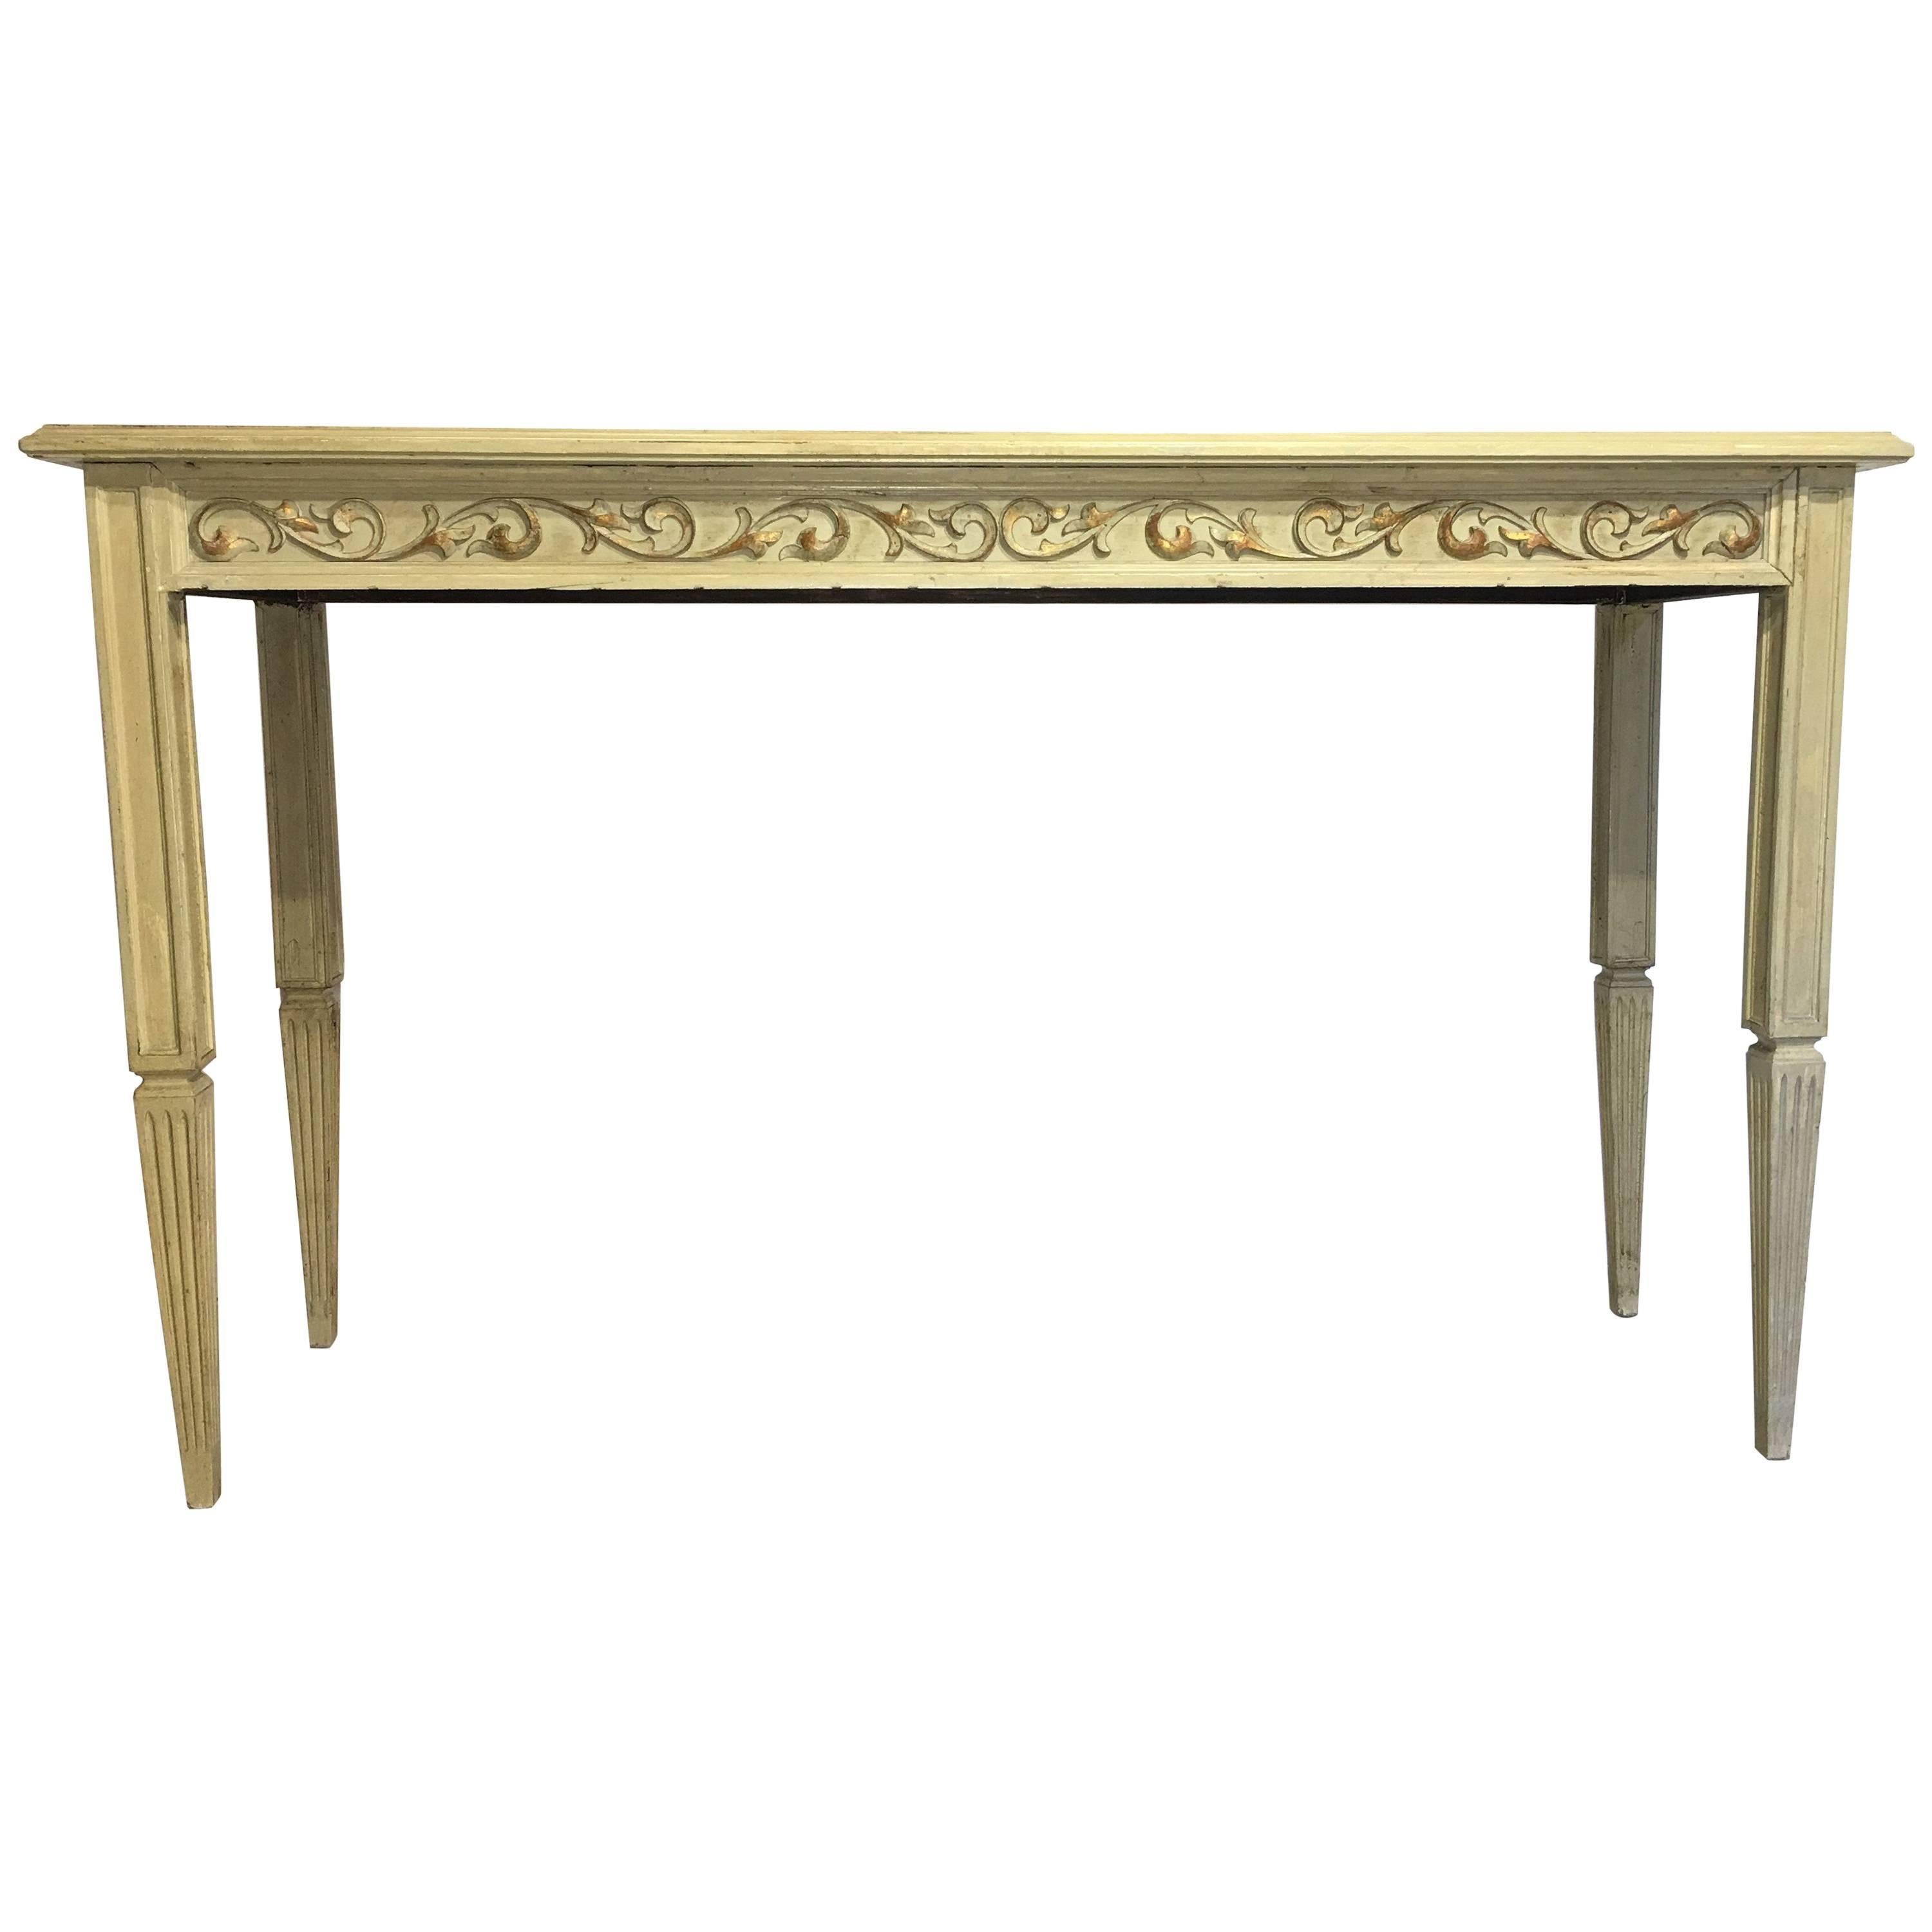 20th Century Painted Cream Beige Console Table with Ornamental Carved Relief For Sale